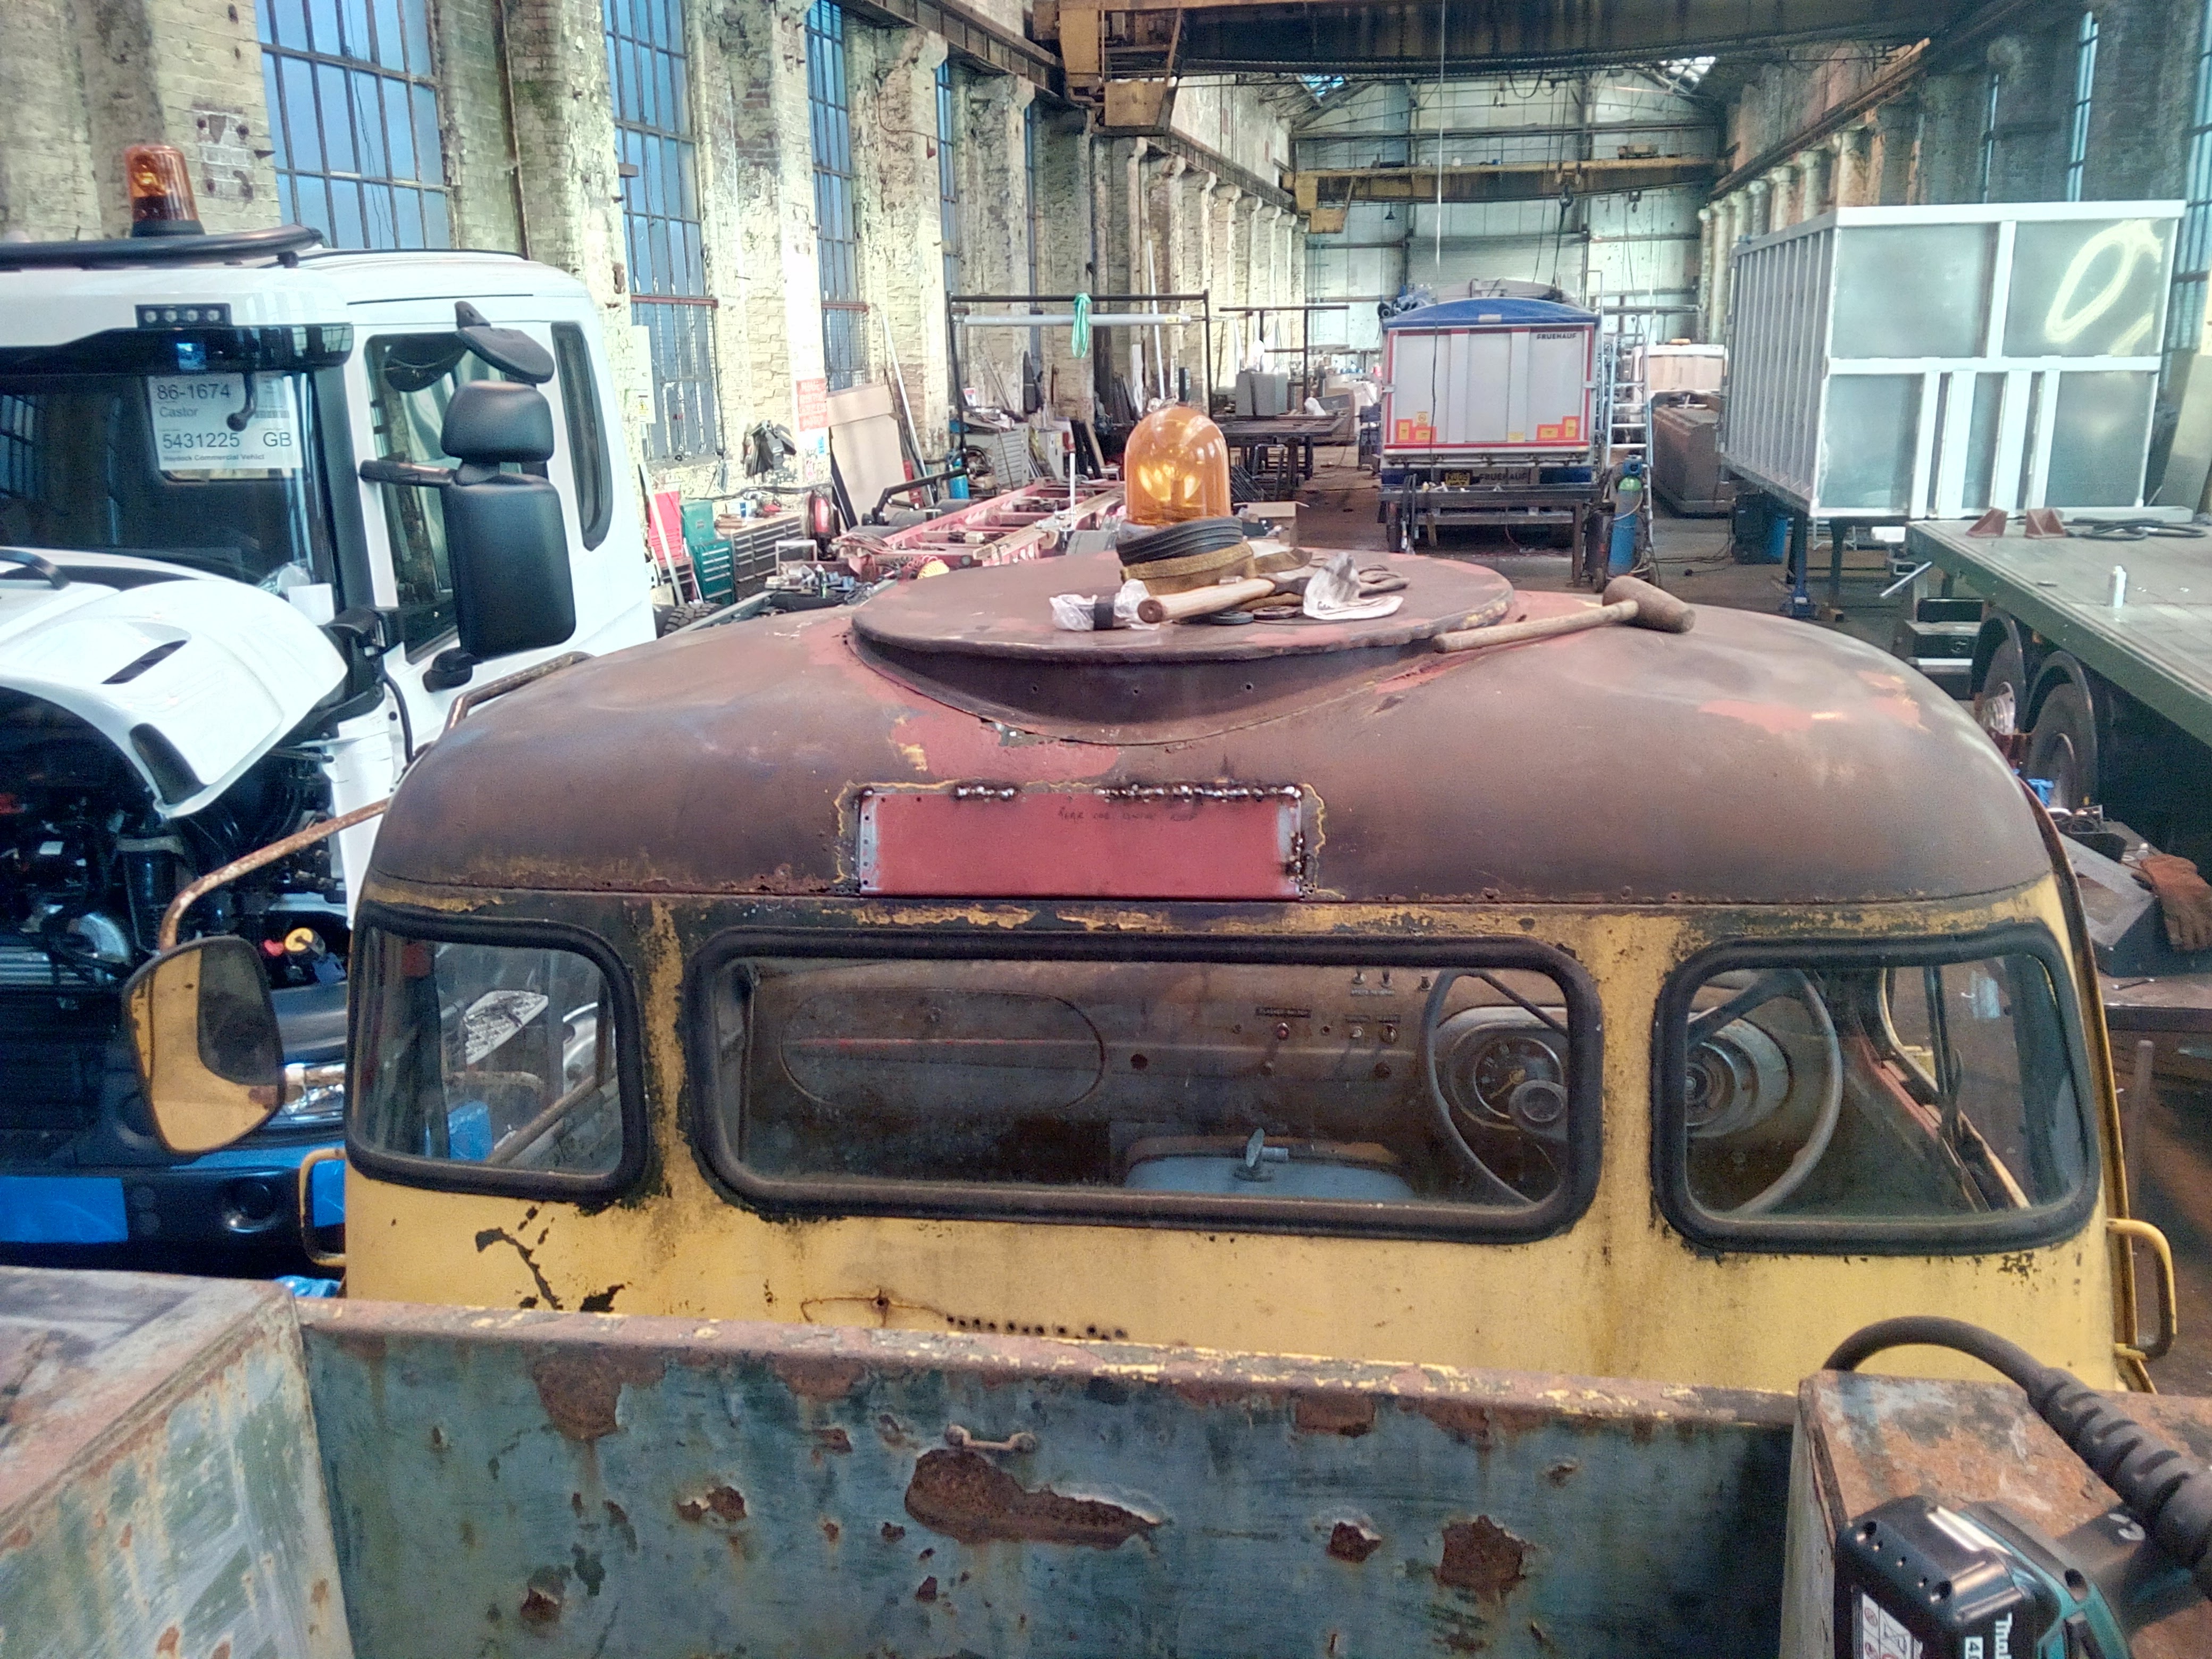 Photograph of the back of the truck cab, with the truck now
parked inside an old workshop building; visible all around the truck
are truck bodies in the process of being built, and a modern tipper
truck chassis. Overhead are two very large cranes running on tracks.